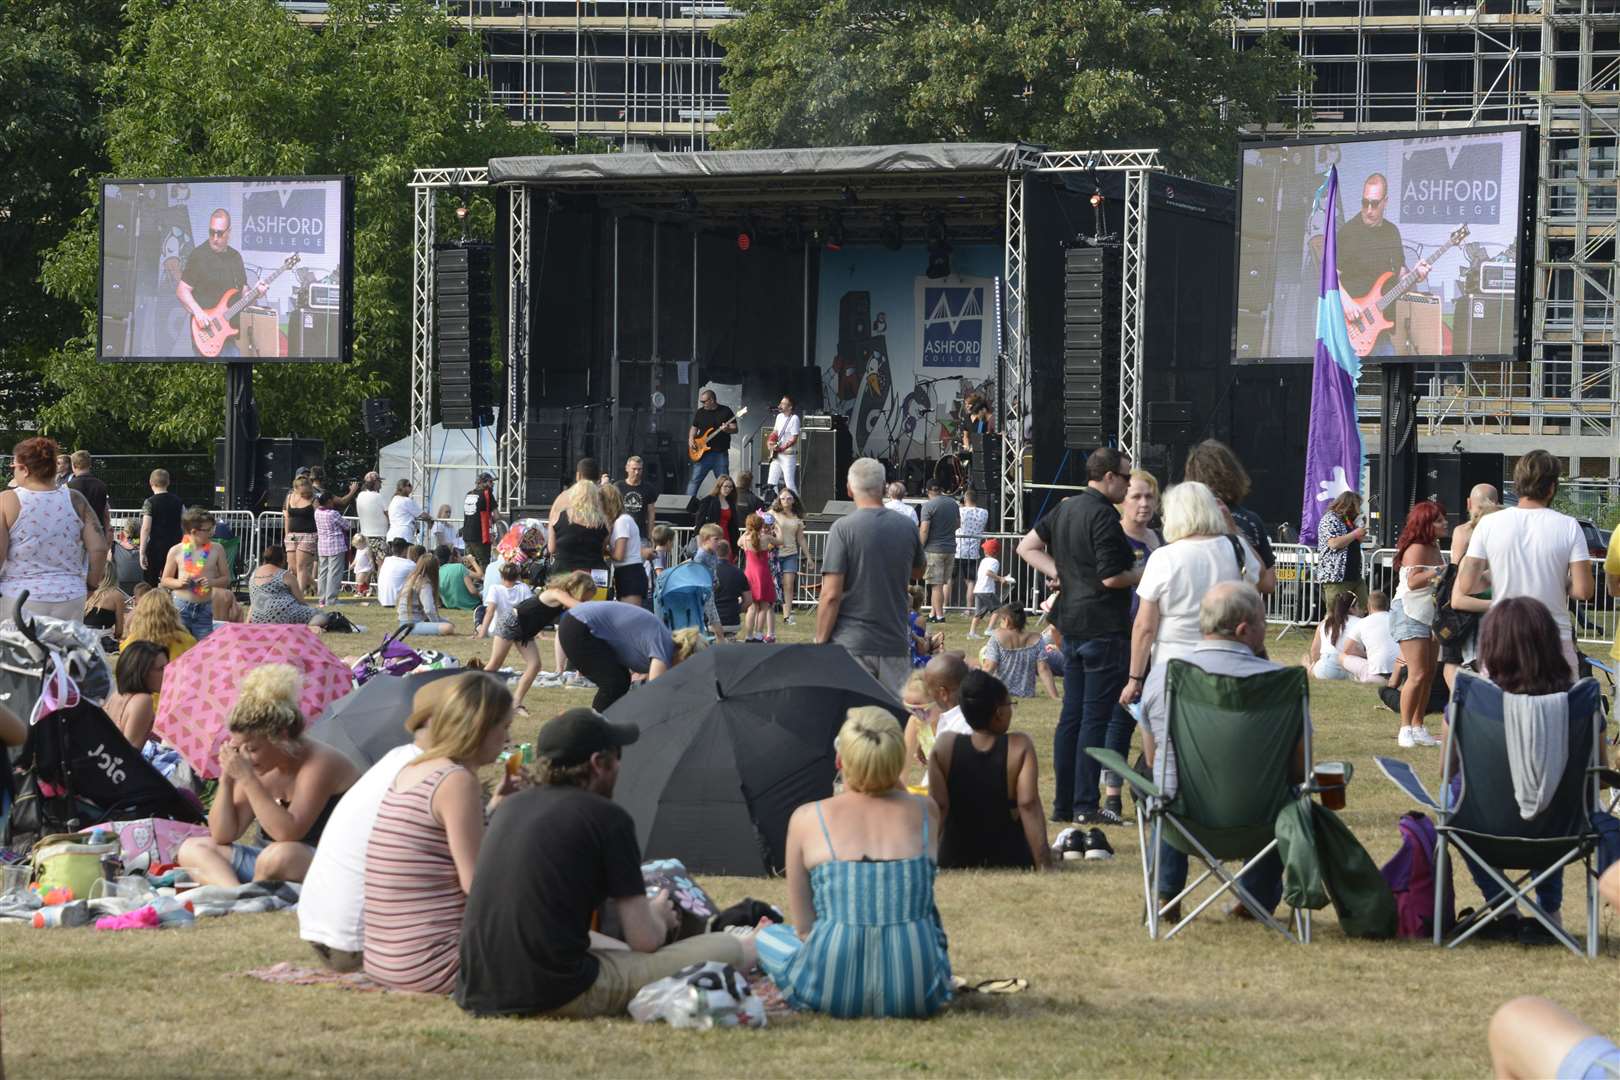 Large crowds came out last year to enjoy bands on the main stage.